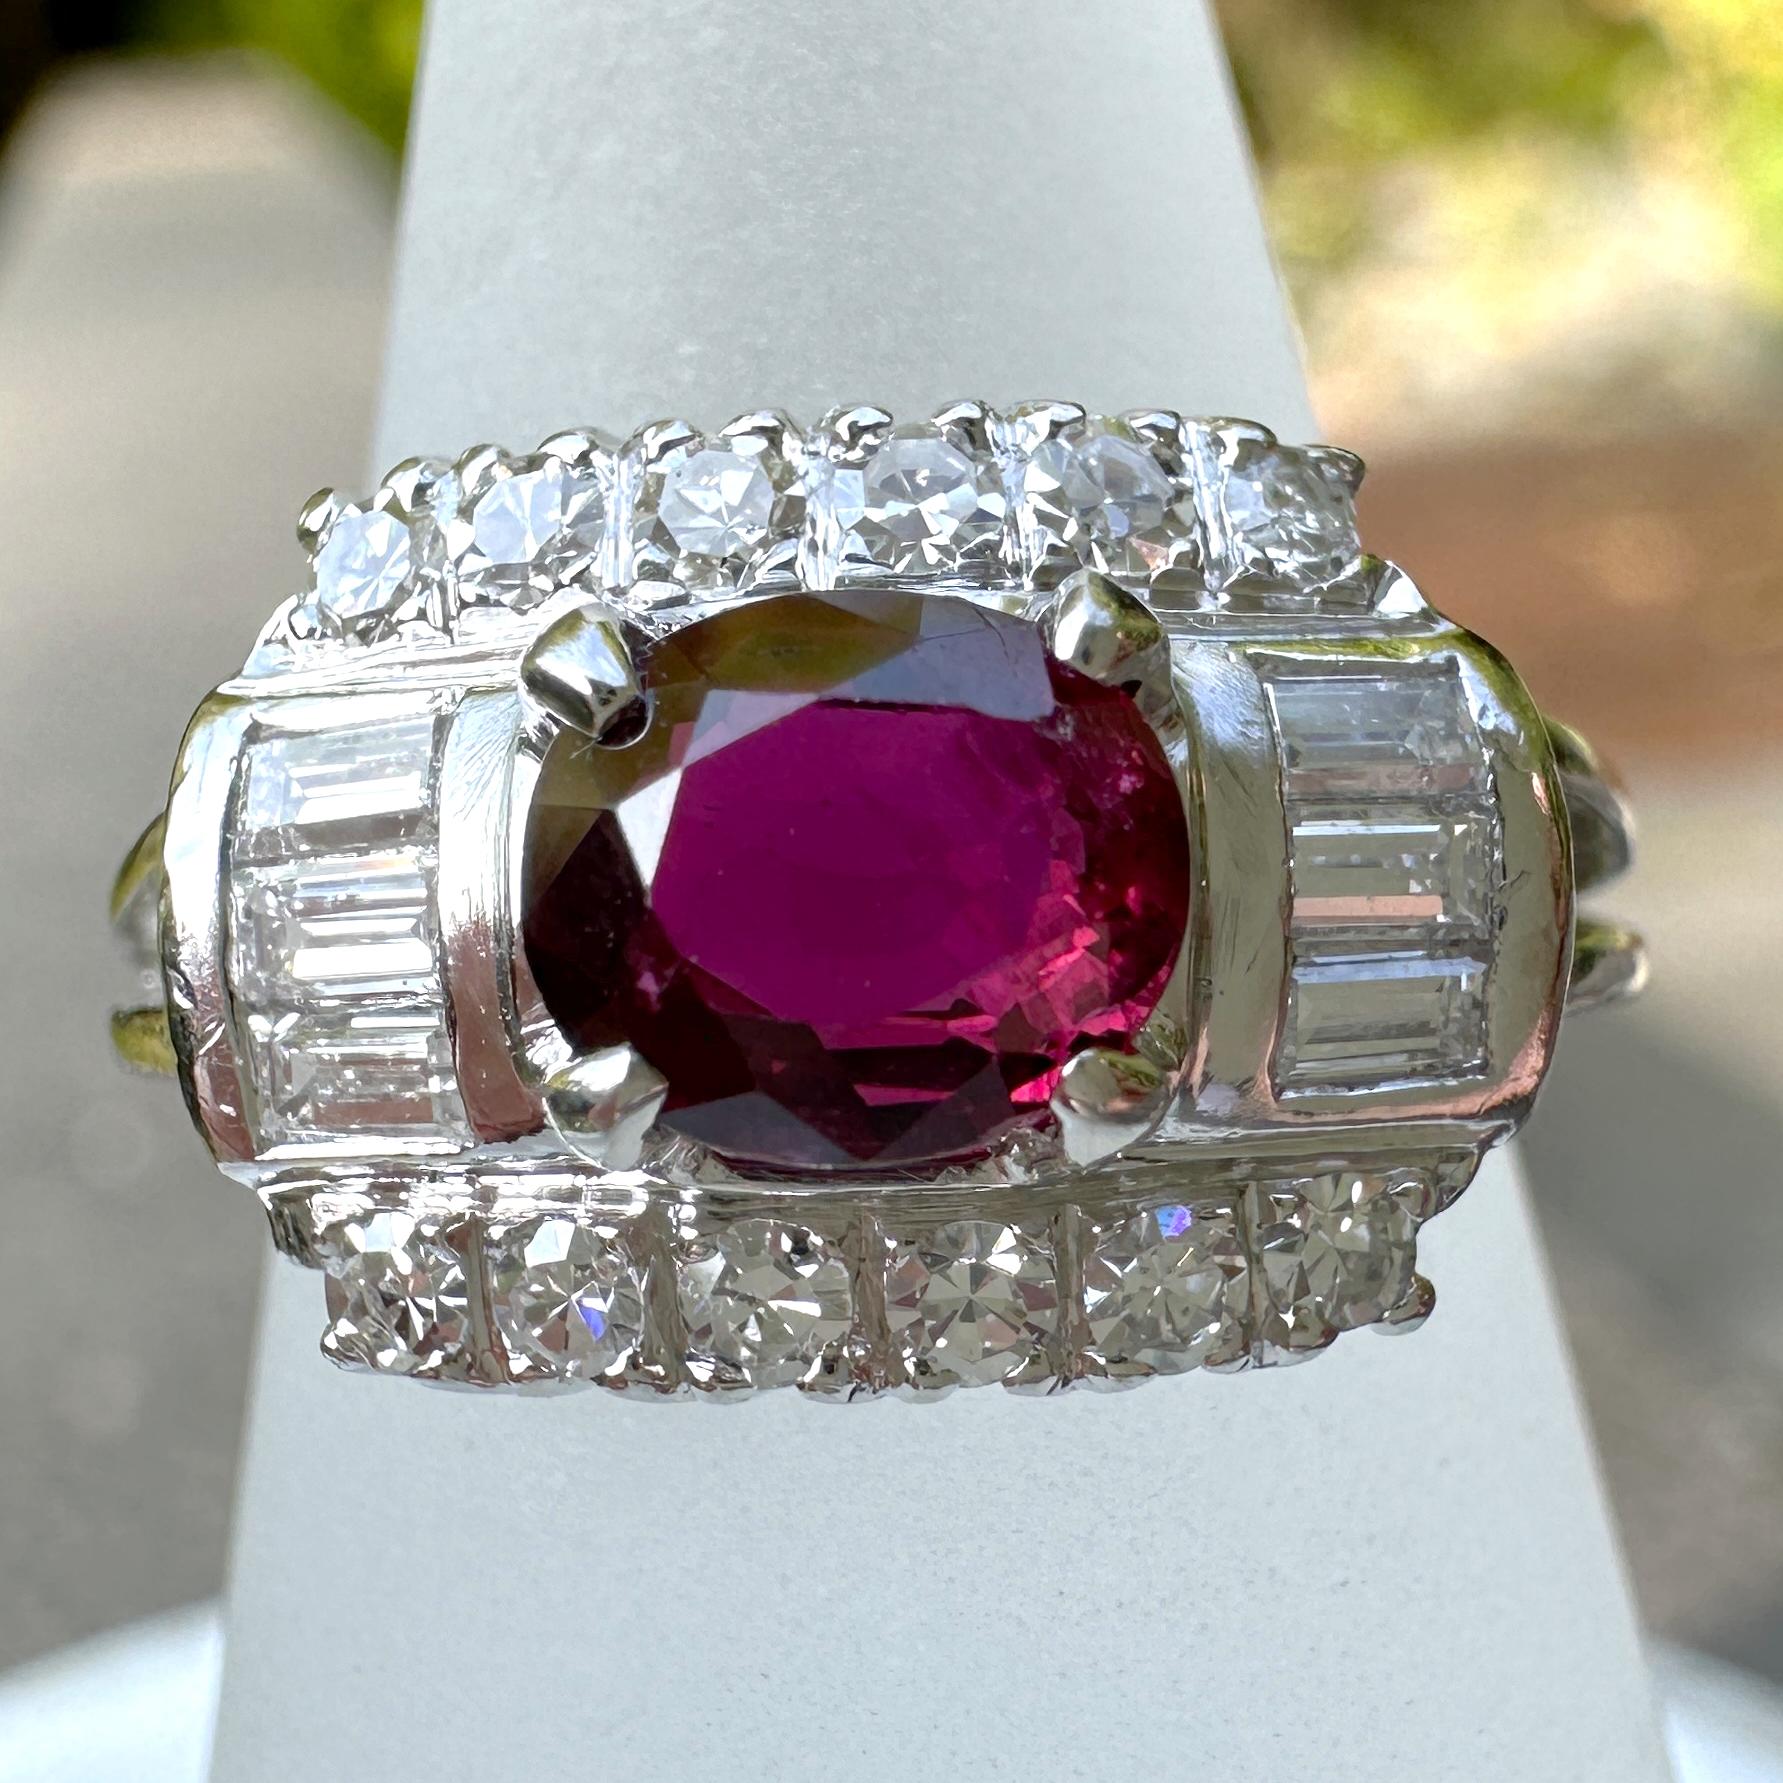 GIA-Certified 1.06 Carat Ruby in Deco-Era Platinum Ring with 0.7 Carats Diamonds In Excellent Condition For Sale In Sherman Oaks, CA